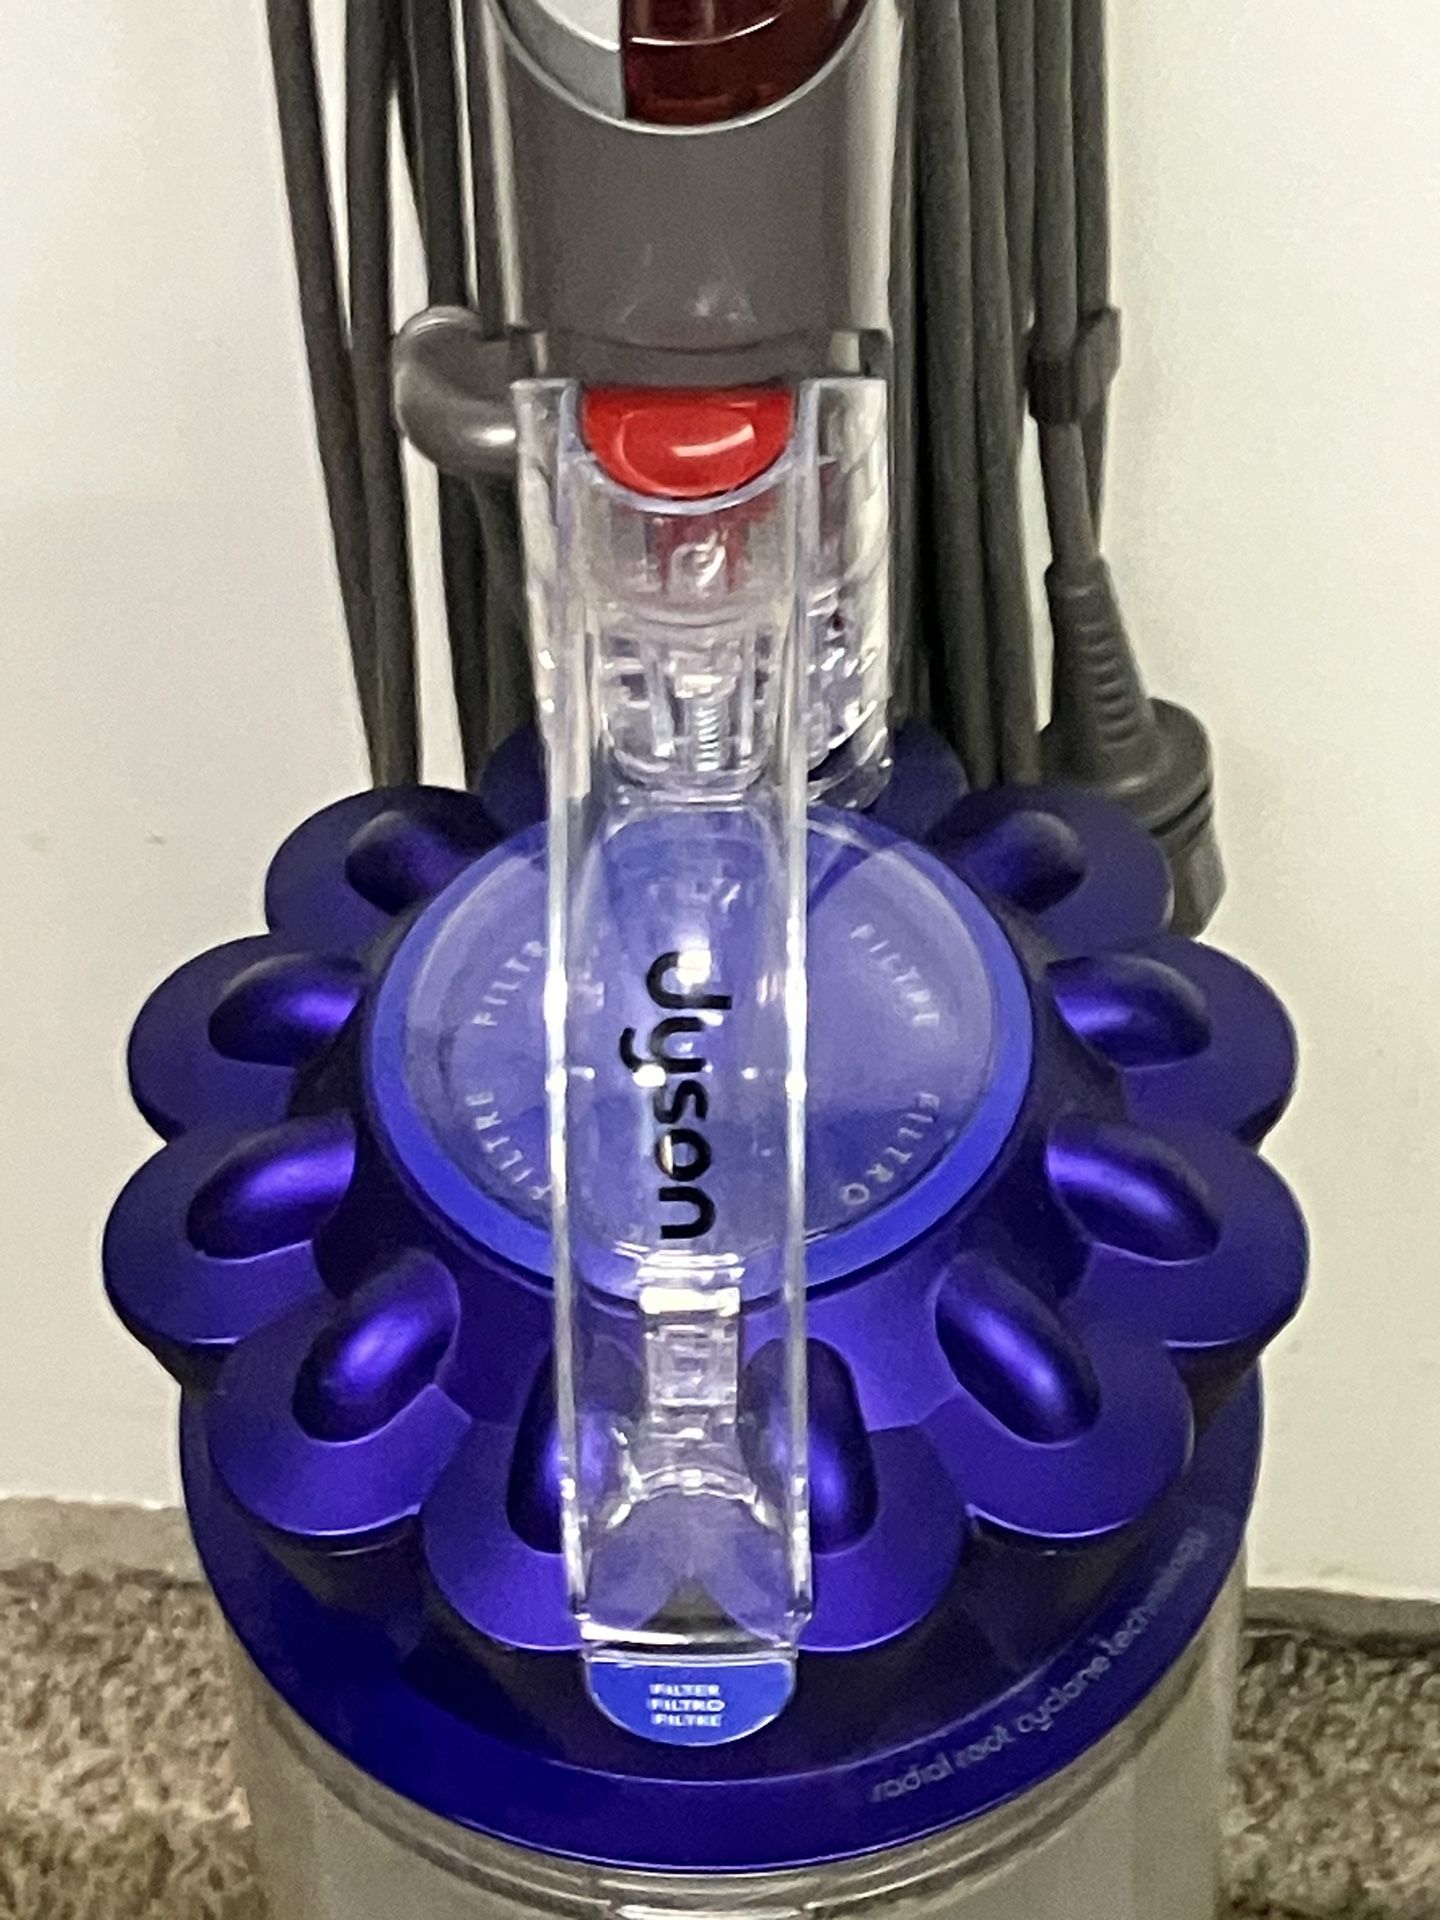 VACUUM DYSON Pet works Great Come With All The Attachments 